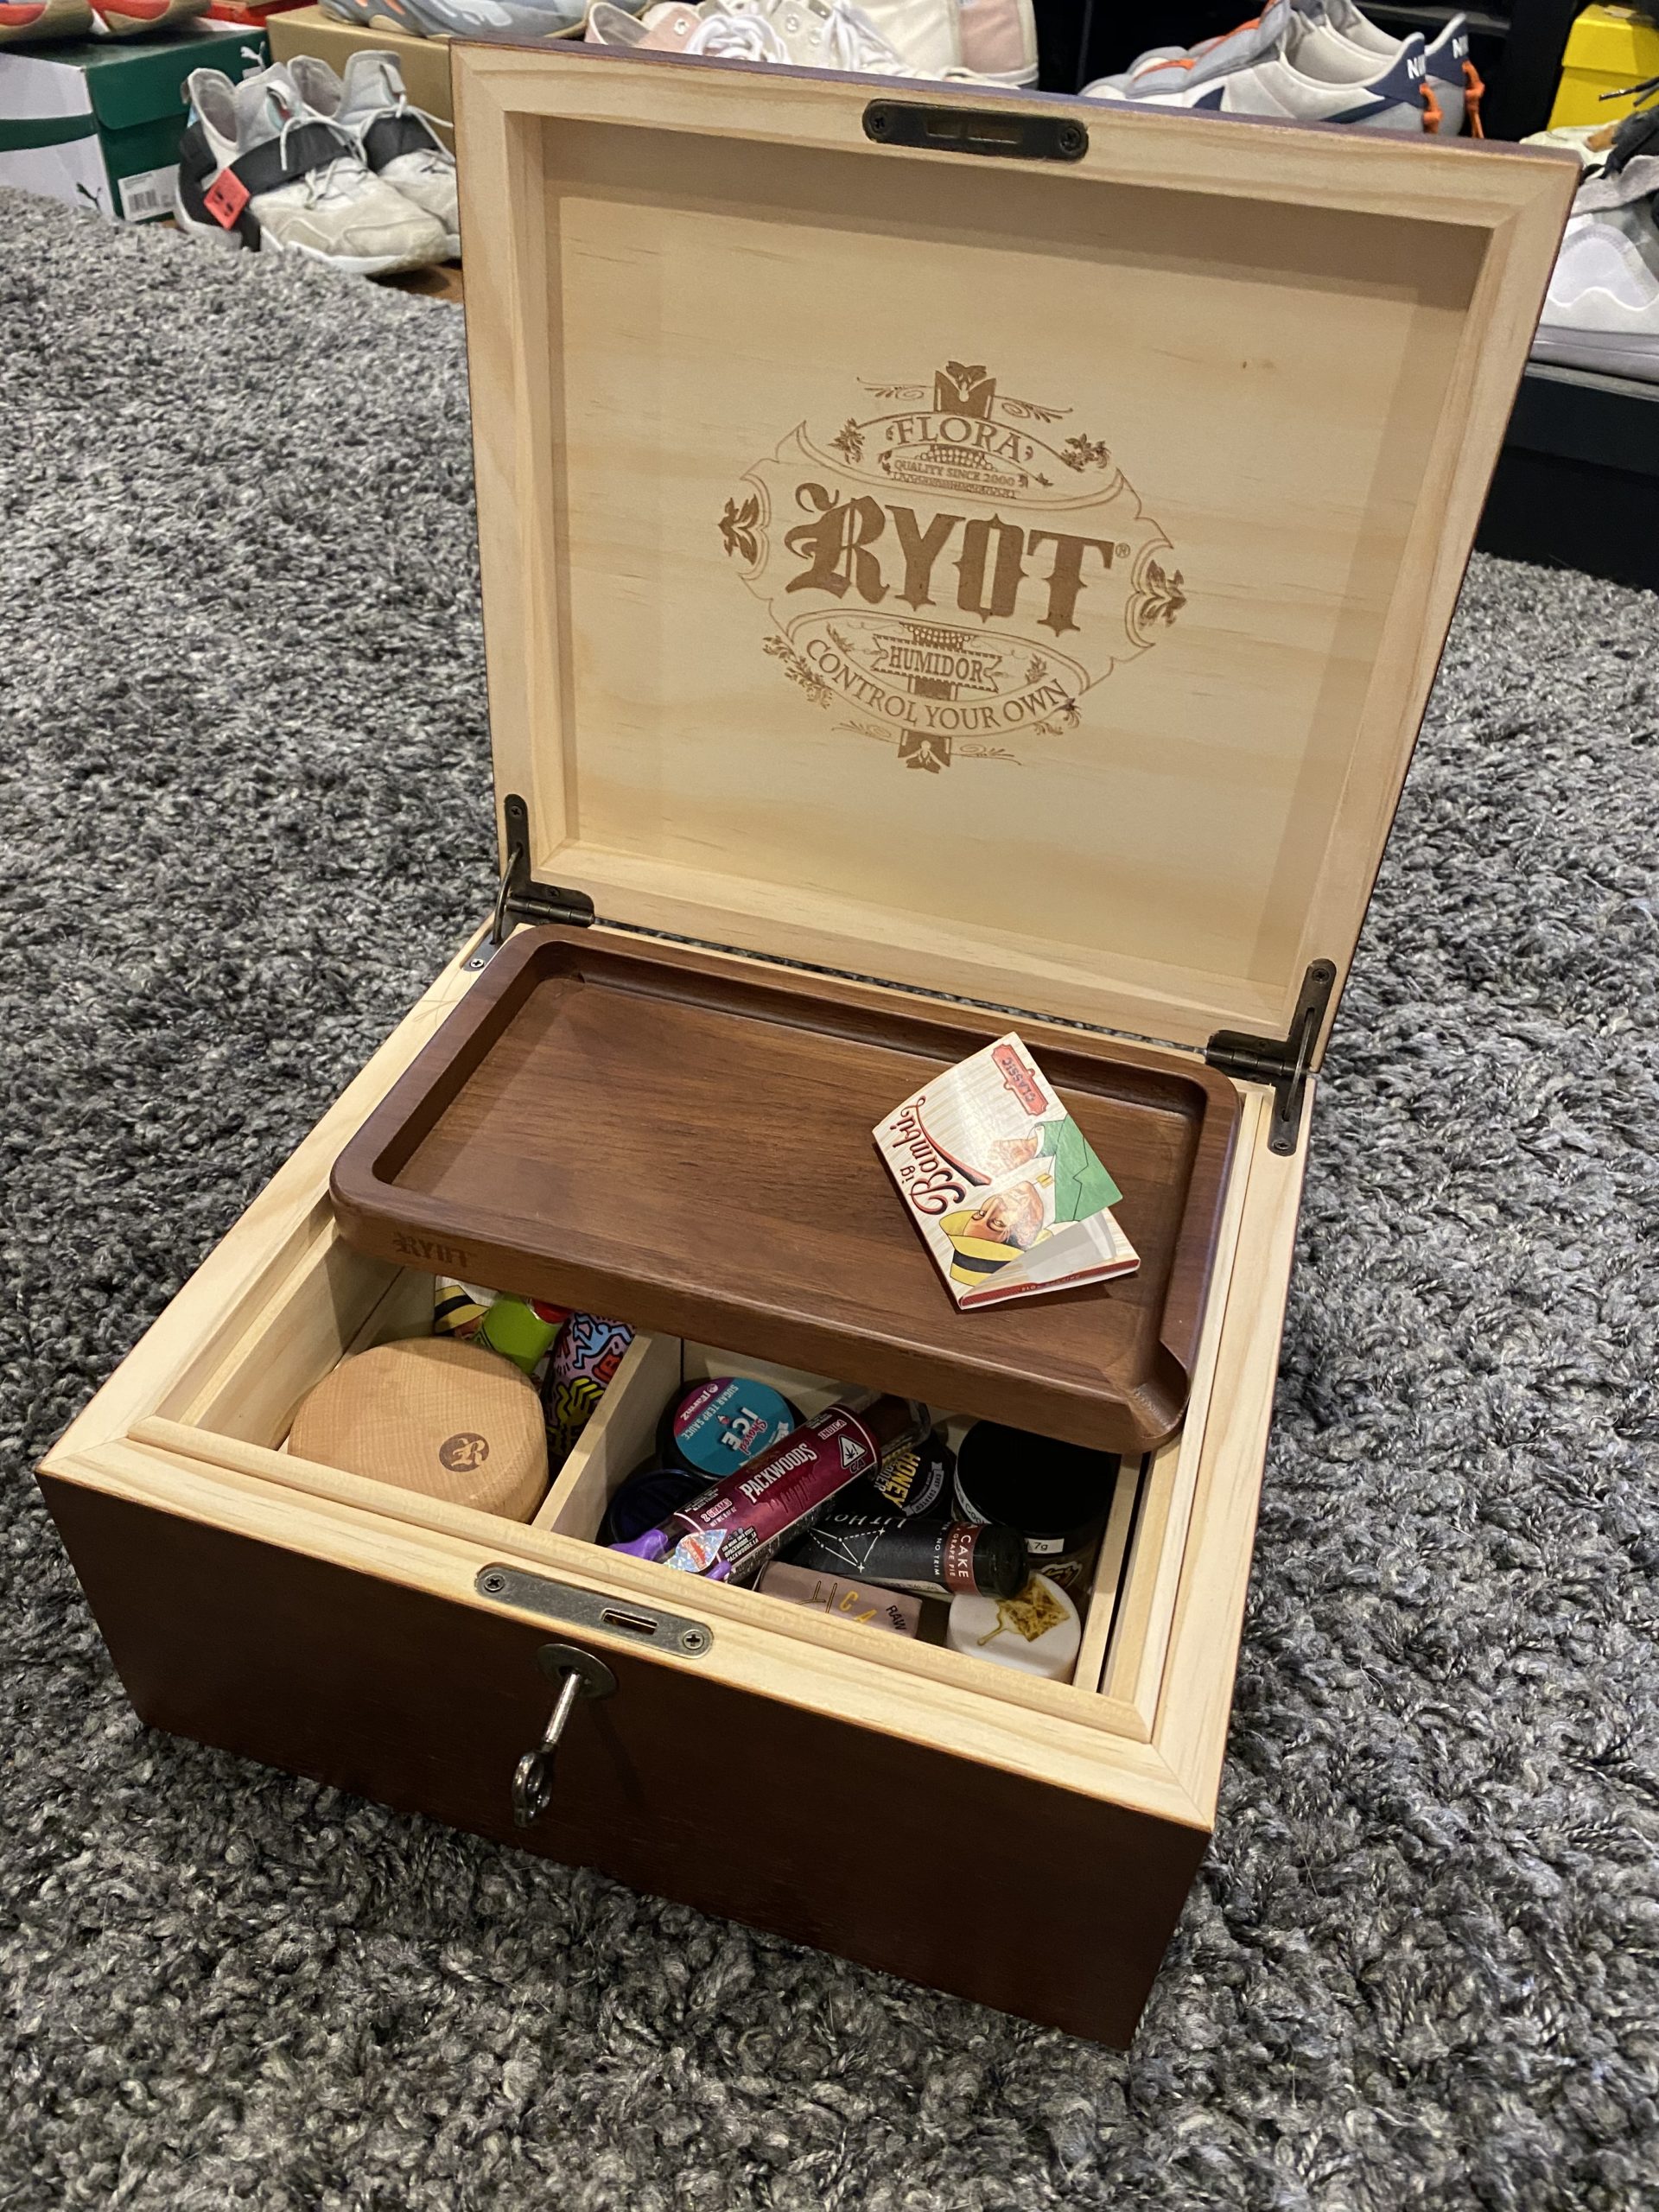 Product Review: RYOT's Lock-R Stash Box